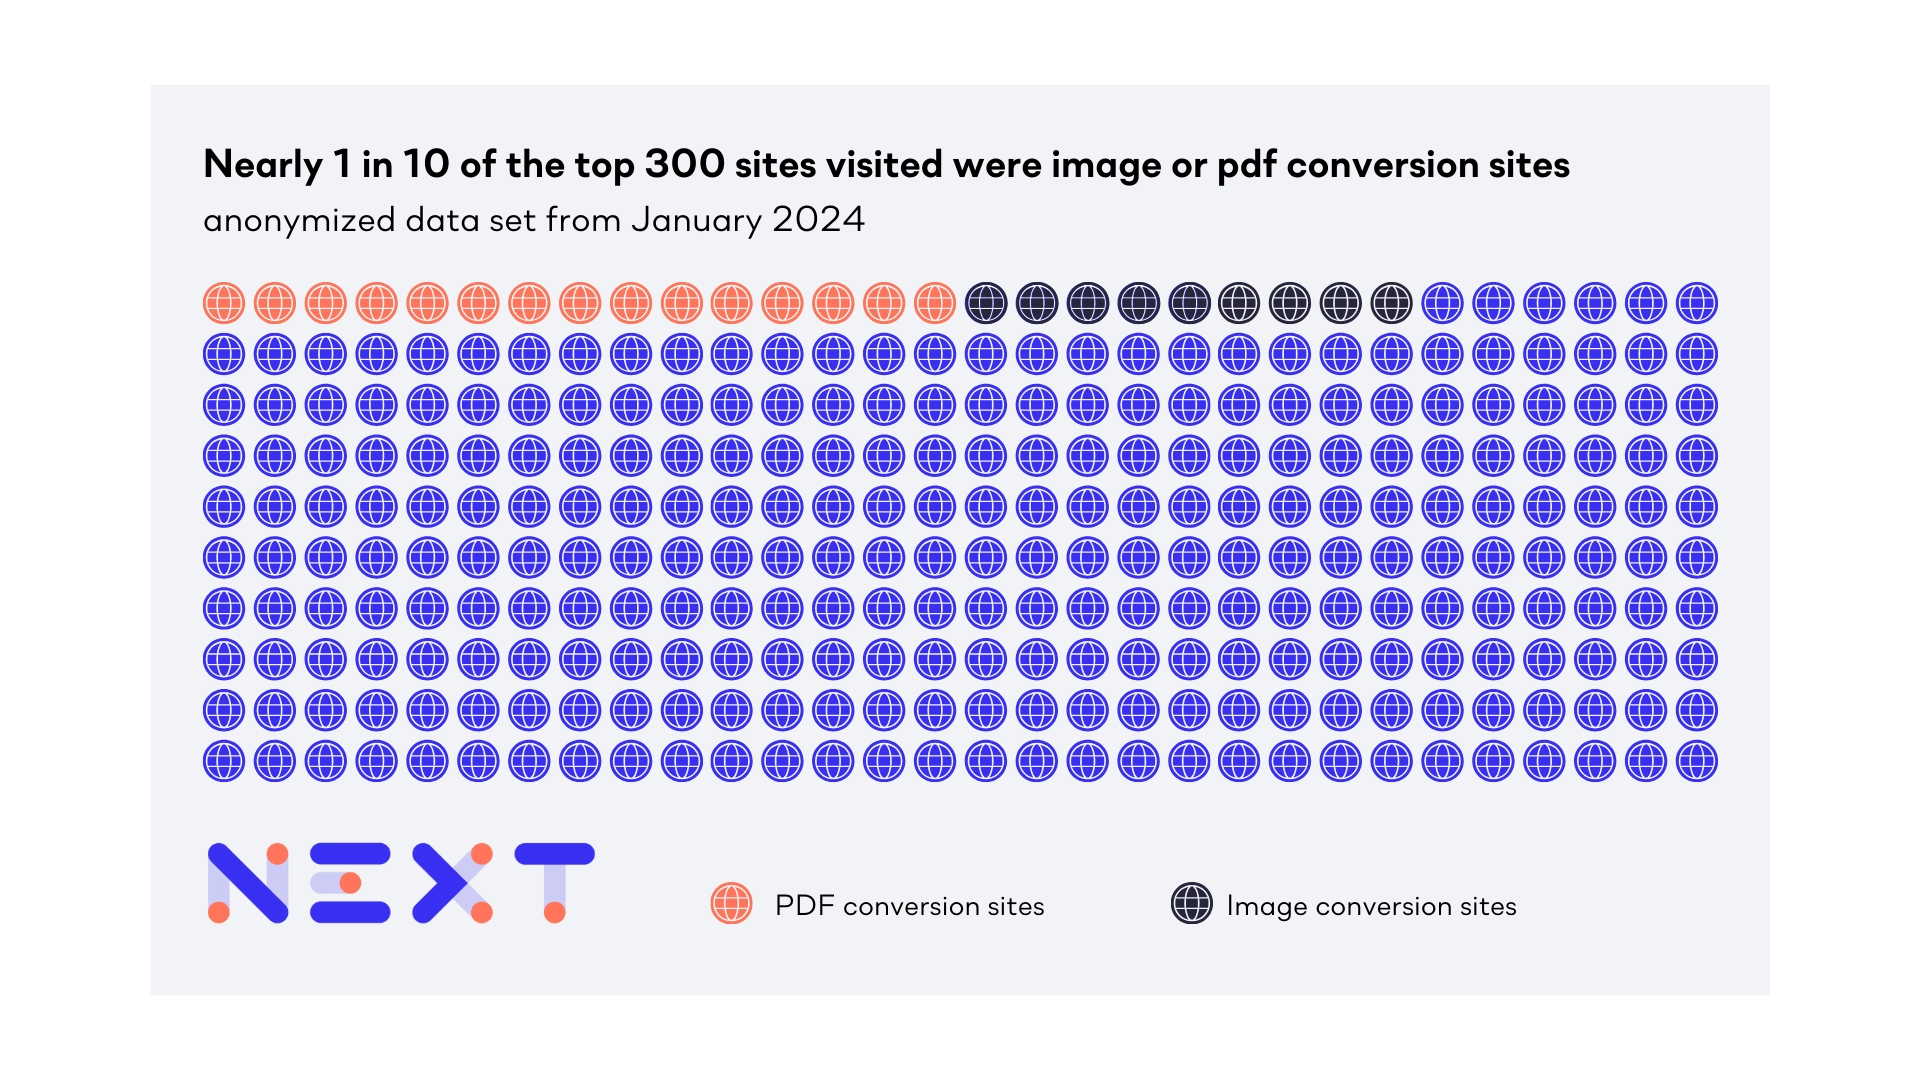 Nearly 1 in 10 of the SaaS apps observed were image or pdf conversion sites